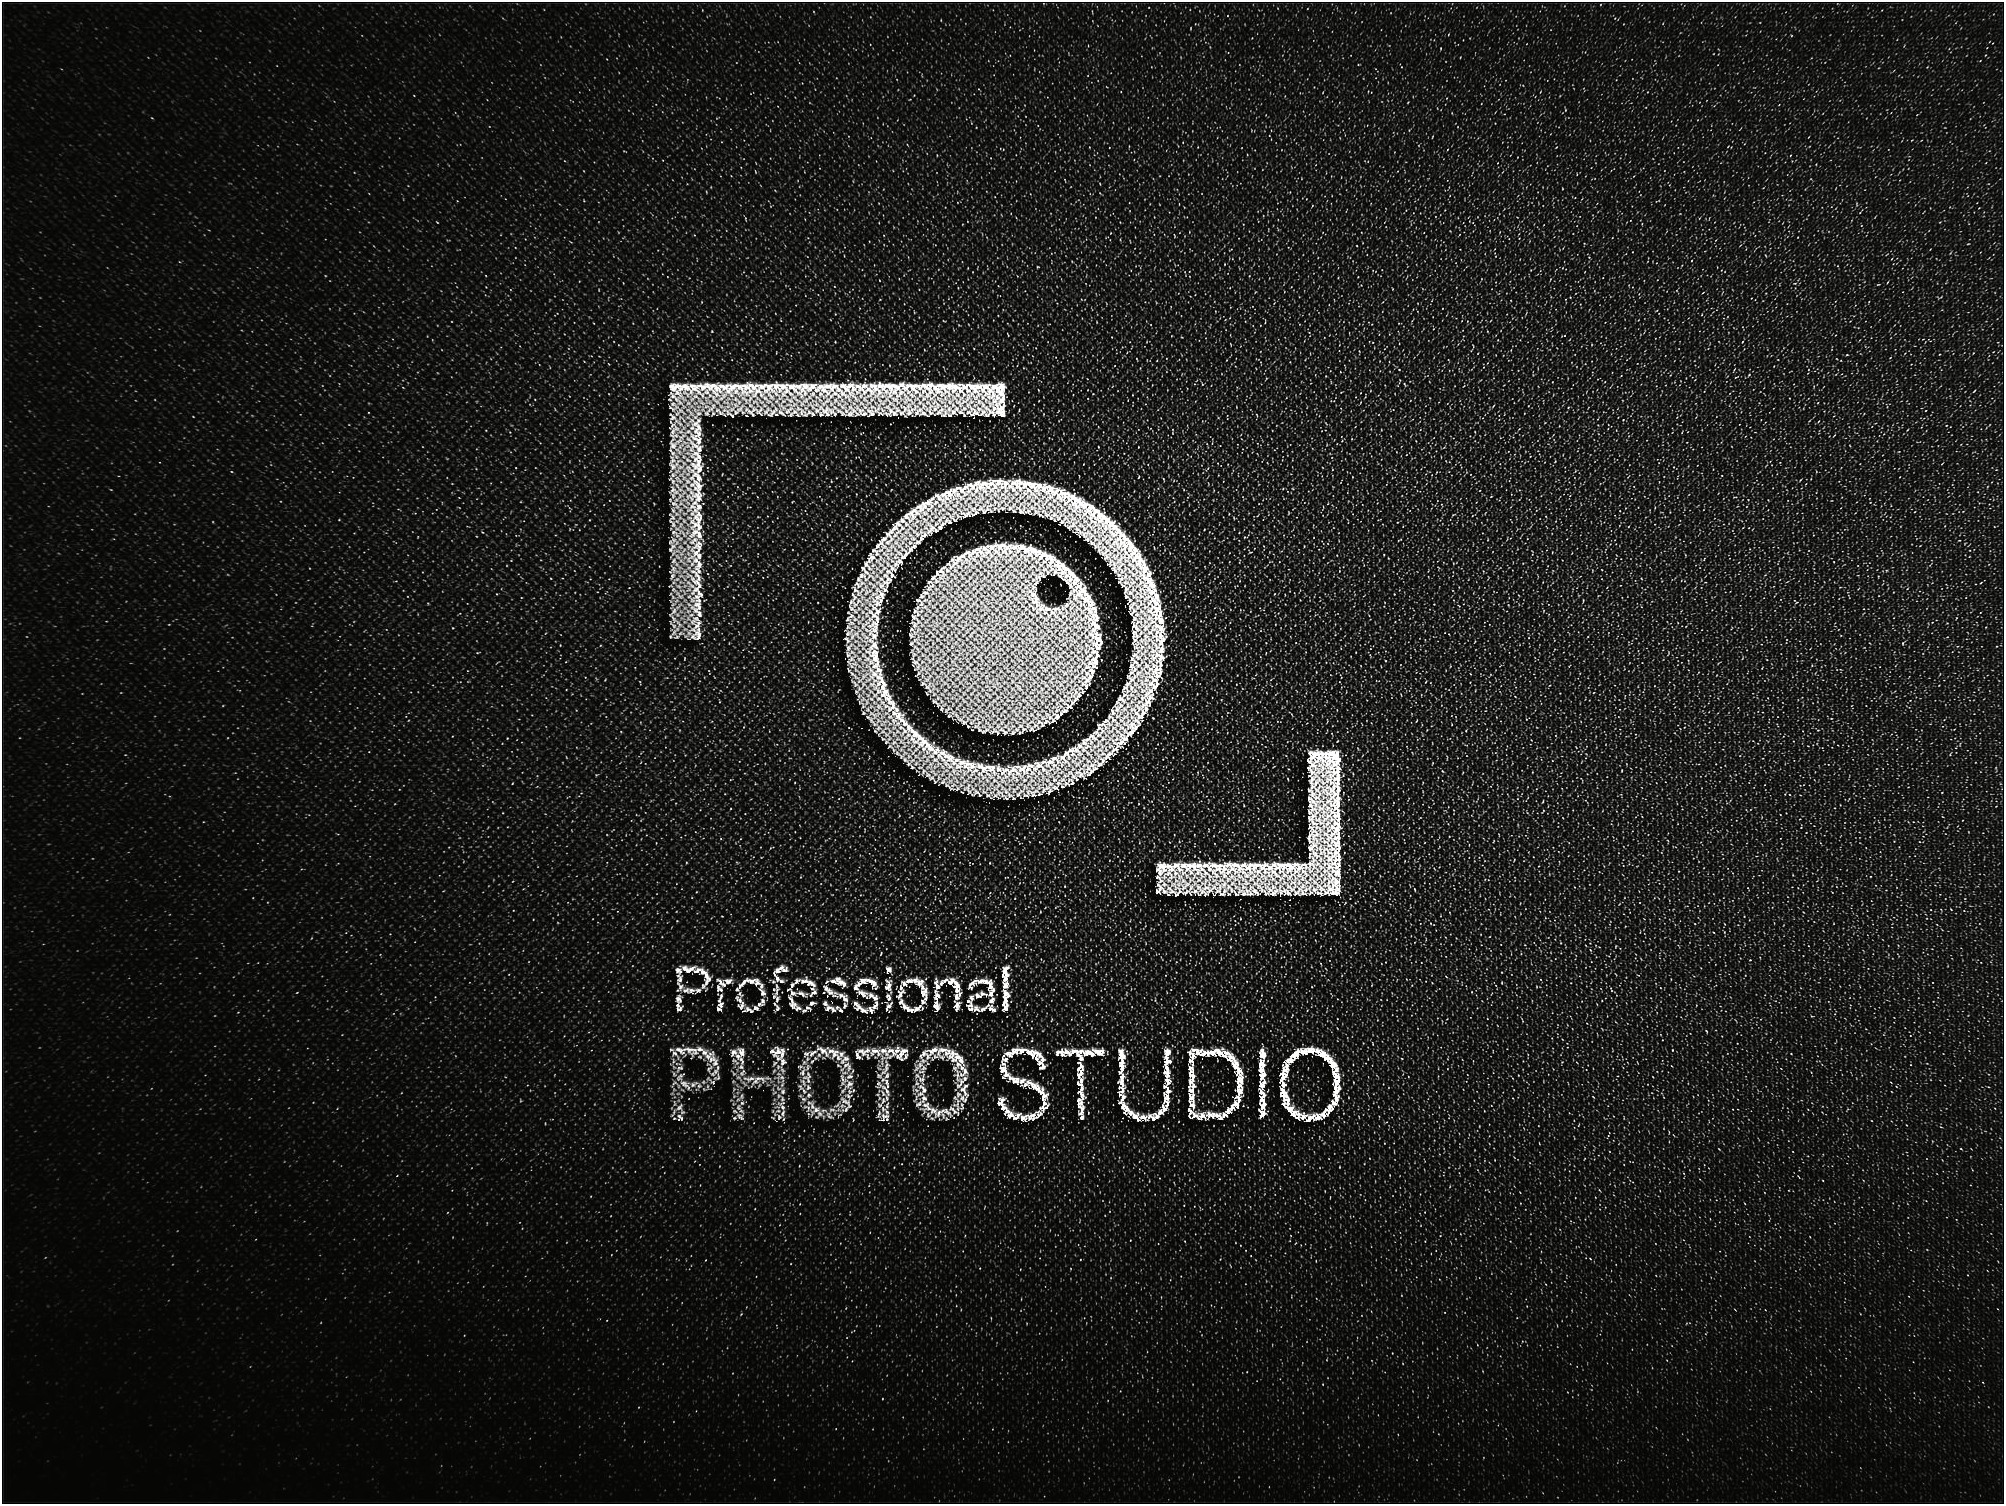 Free Download Photoshop Templates For Photographers